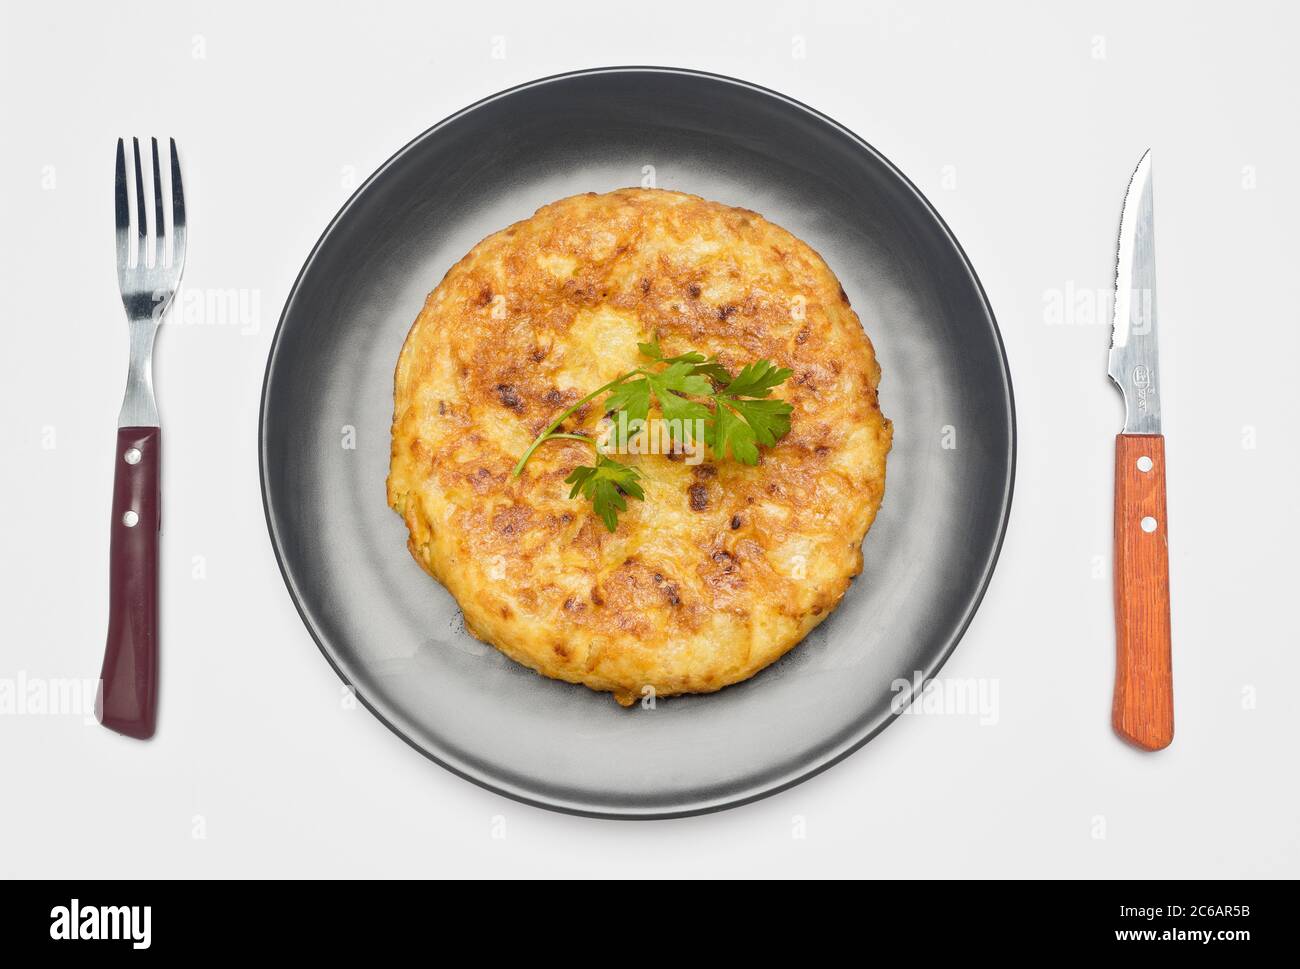 The Spanish omelette, potato omelette or Spanish omelette - also called potato omelette in Latin America, the Canary Islands or Andalusia - is an omel Stock Photo